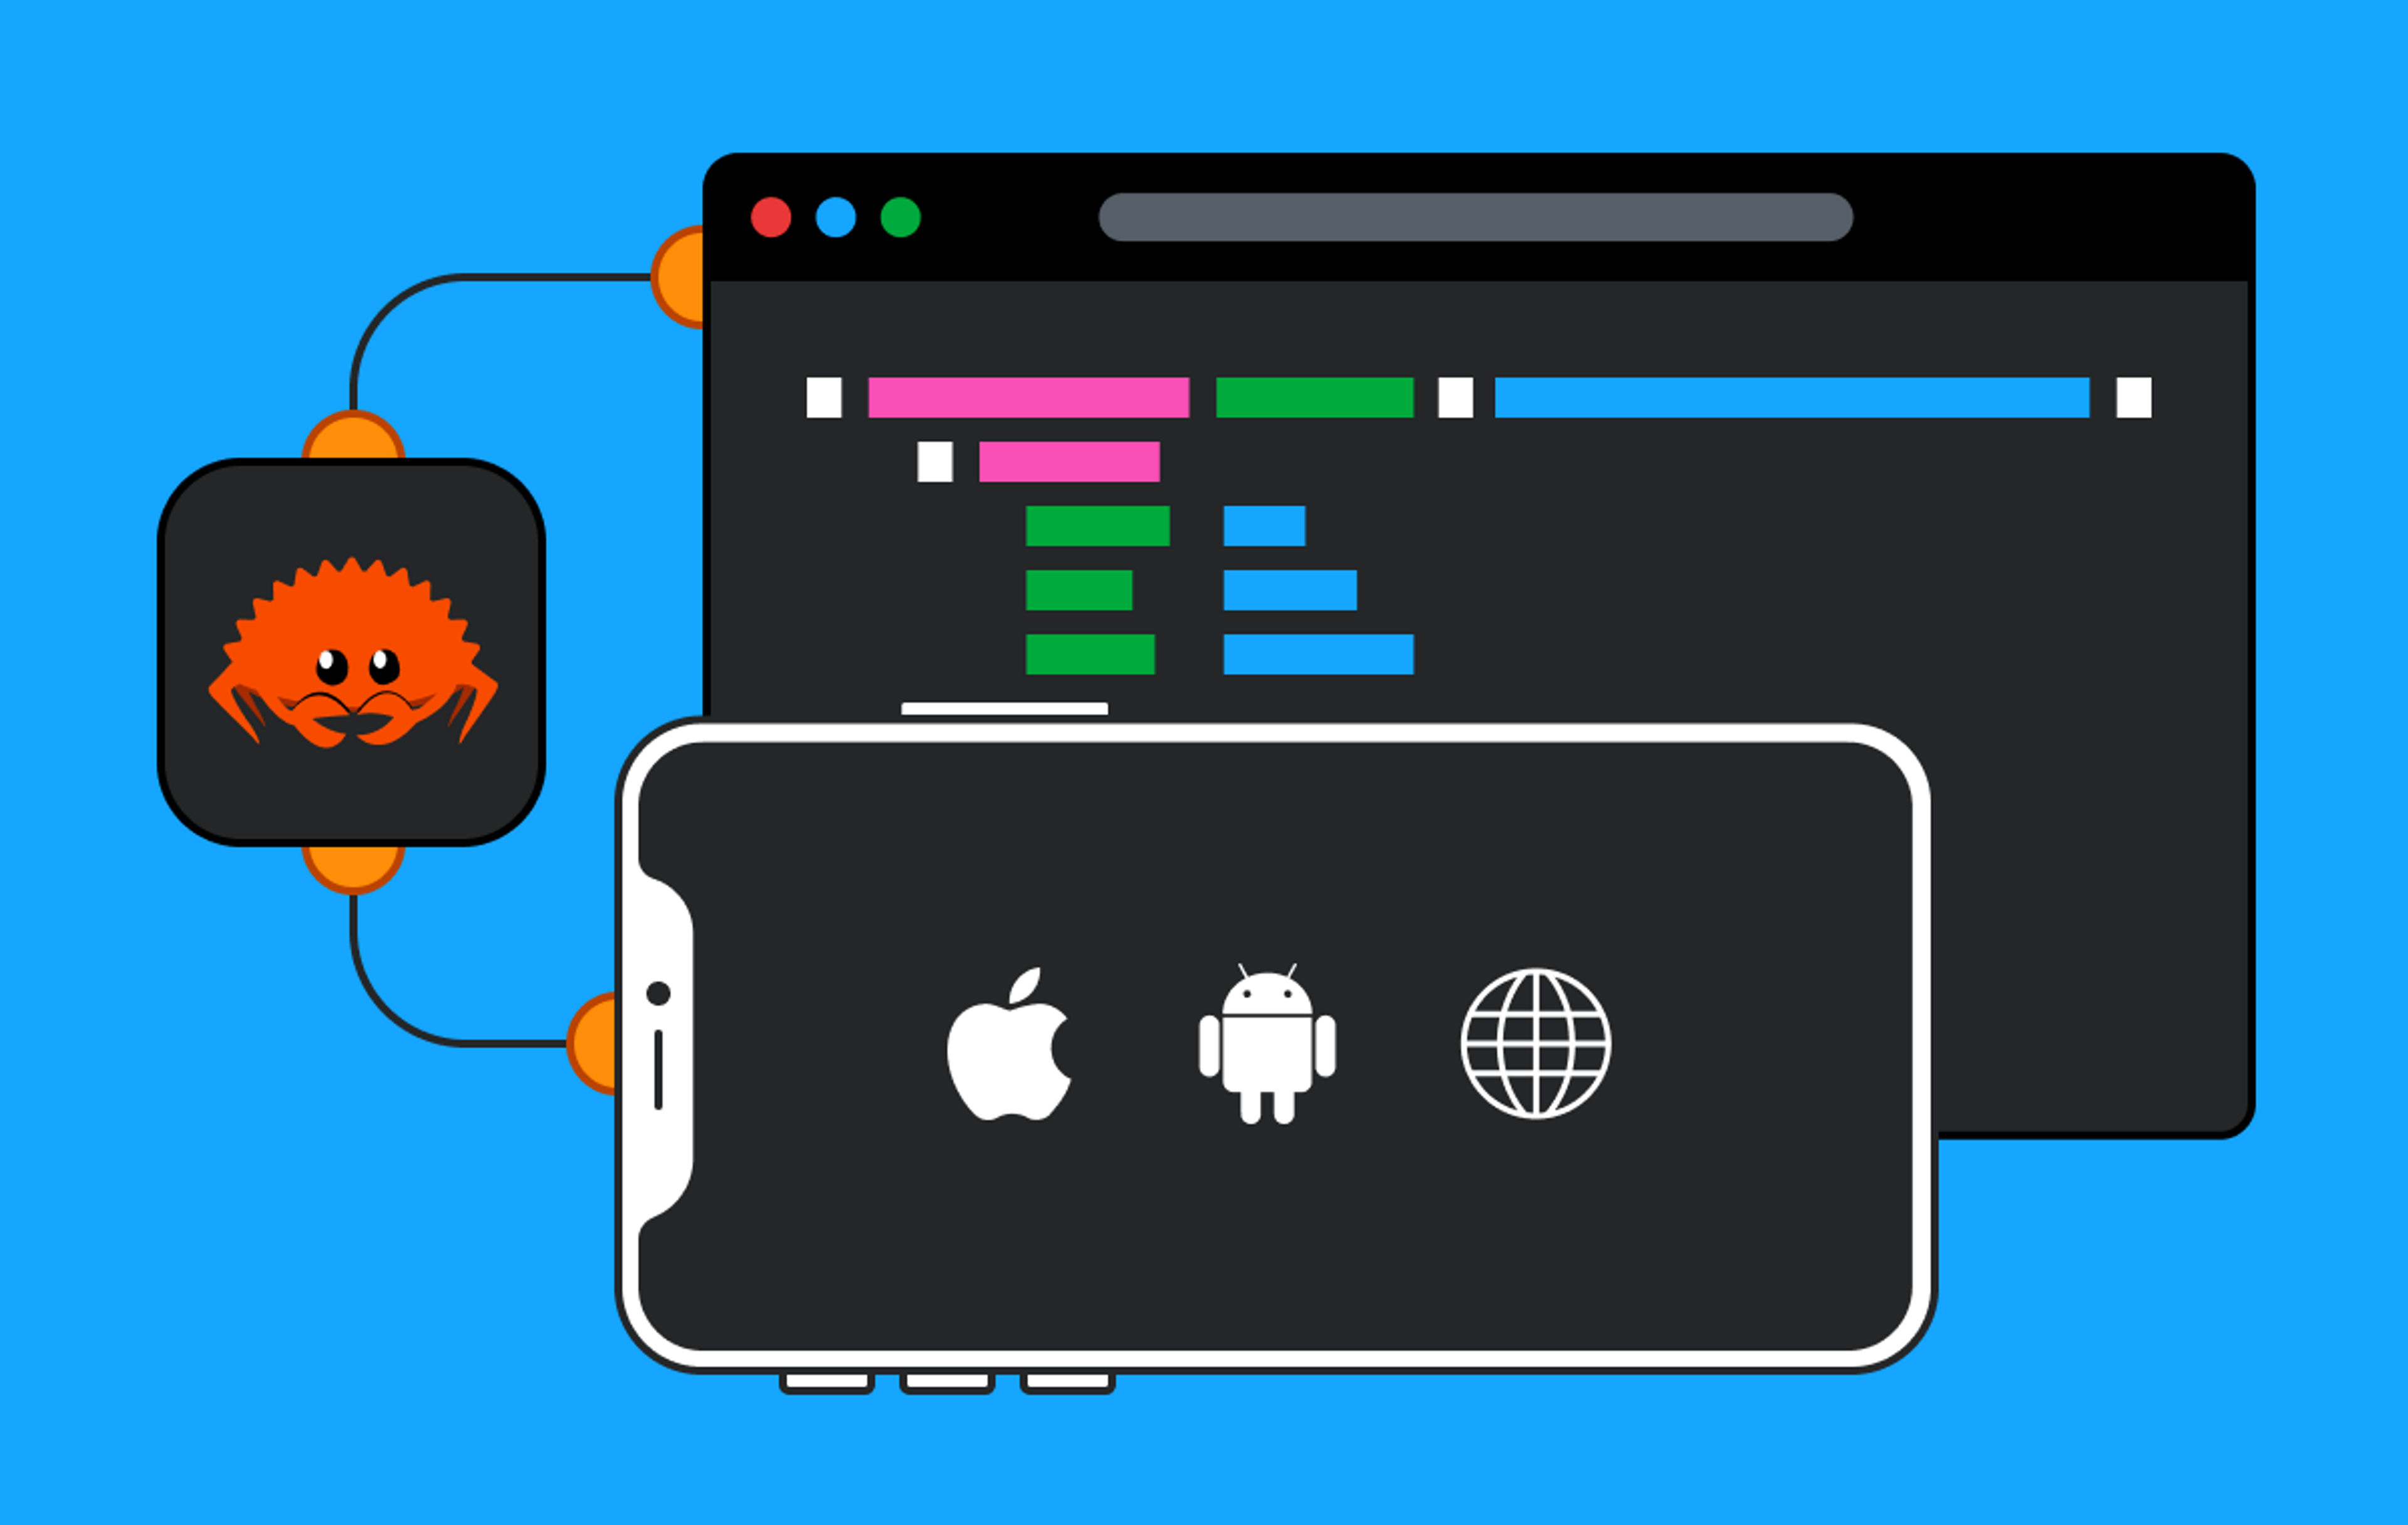 An illustration depicting the Rust logo connected to a web browser and a mobile phone with the Apple logo, Android logo, and globe icon all on screen.. Rust seems to be powering all platforms. Neat!